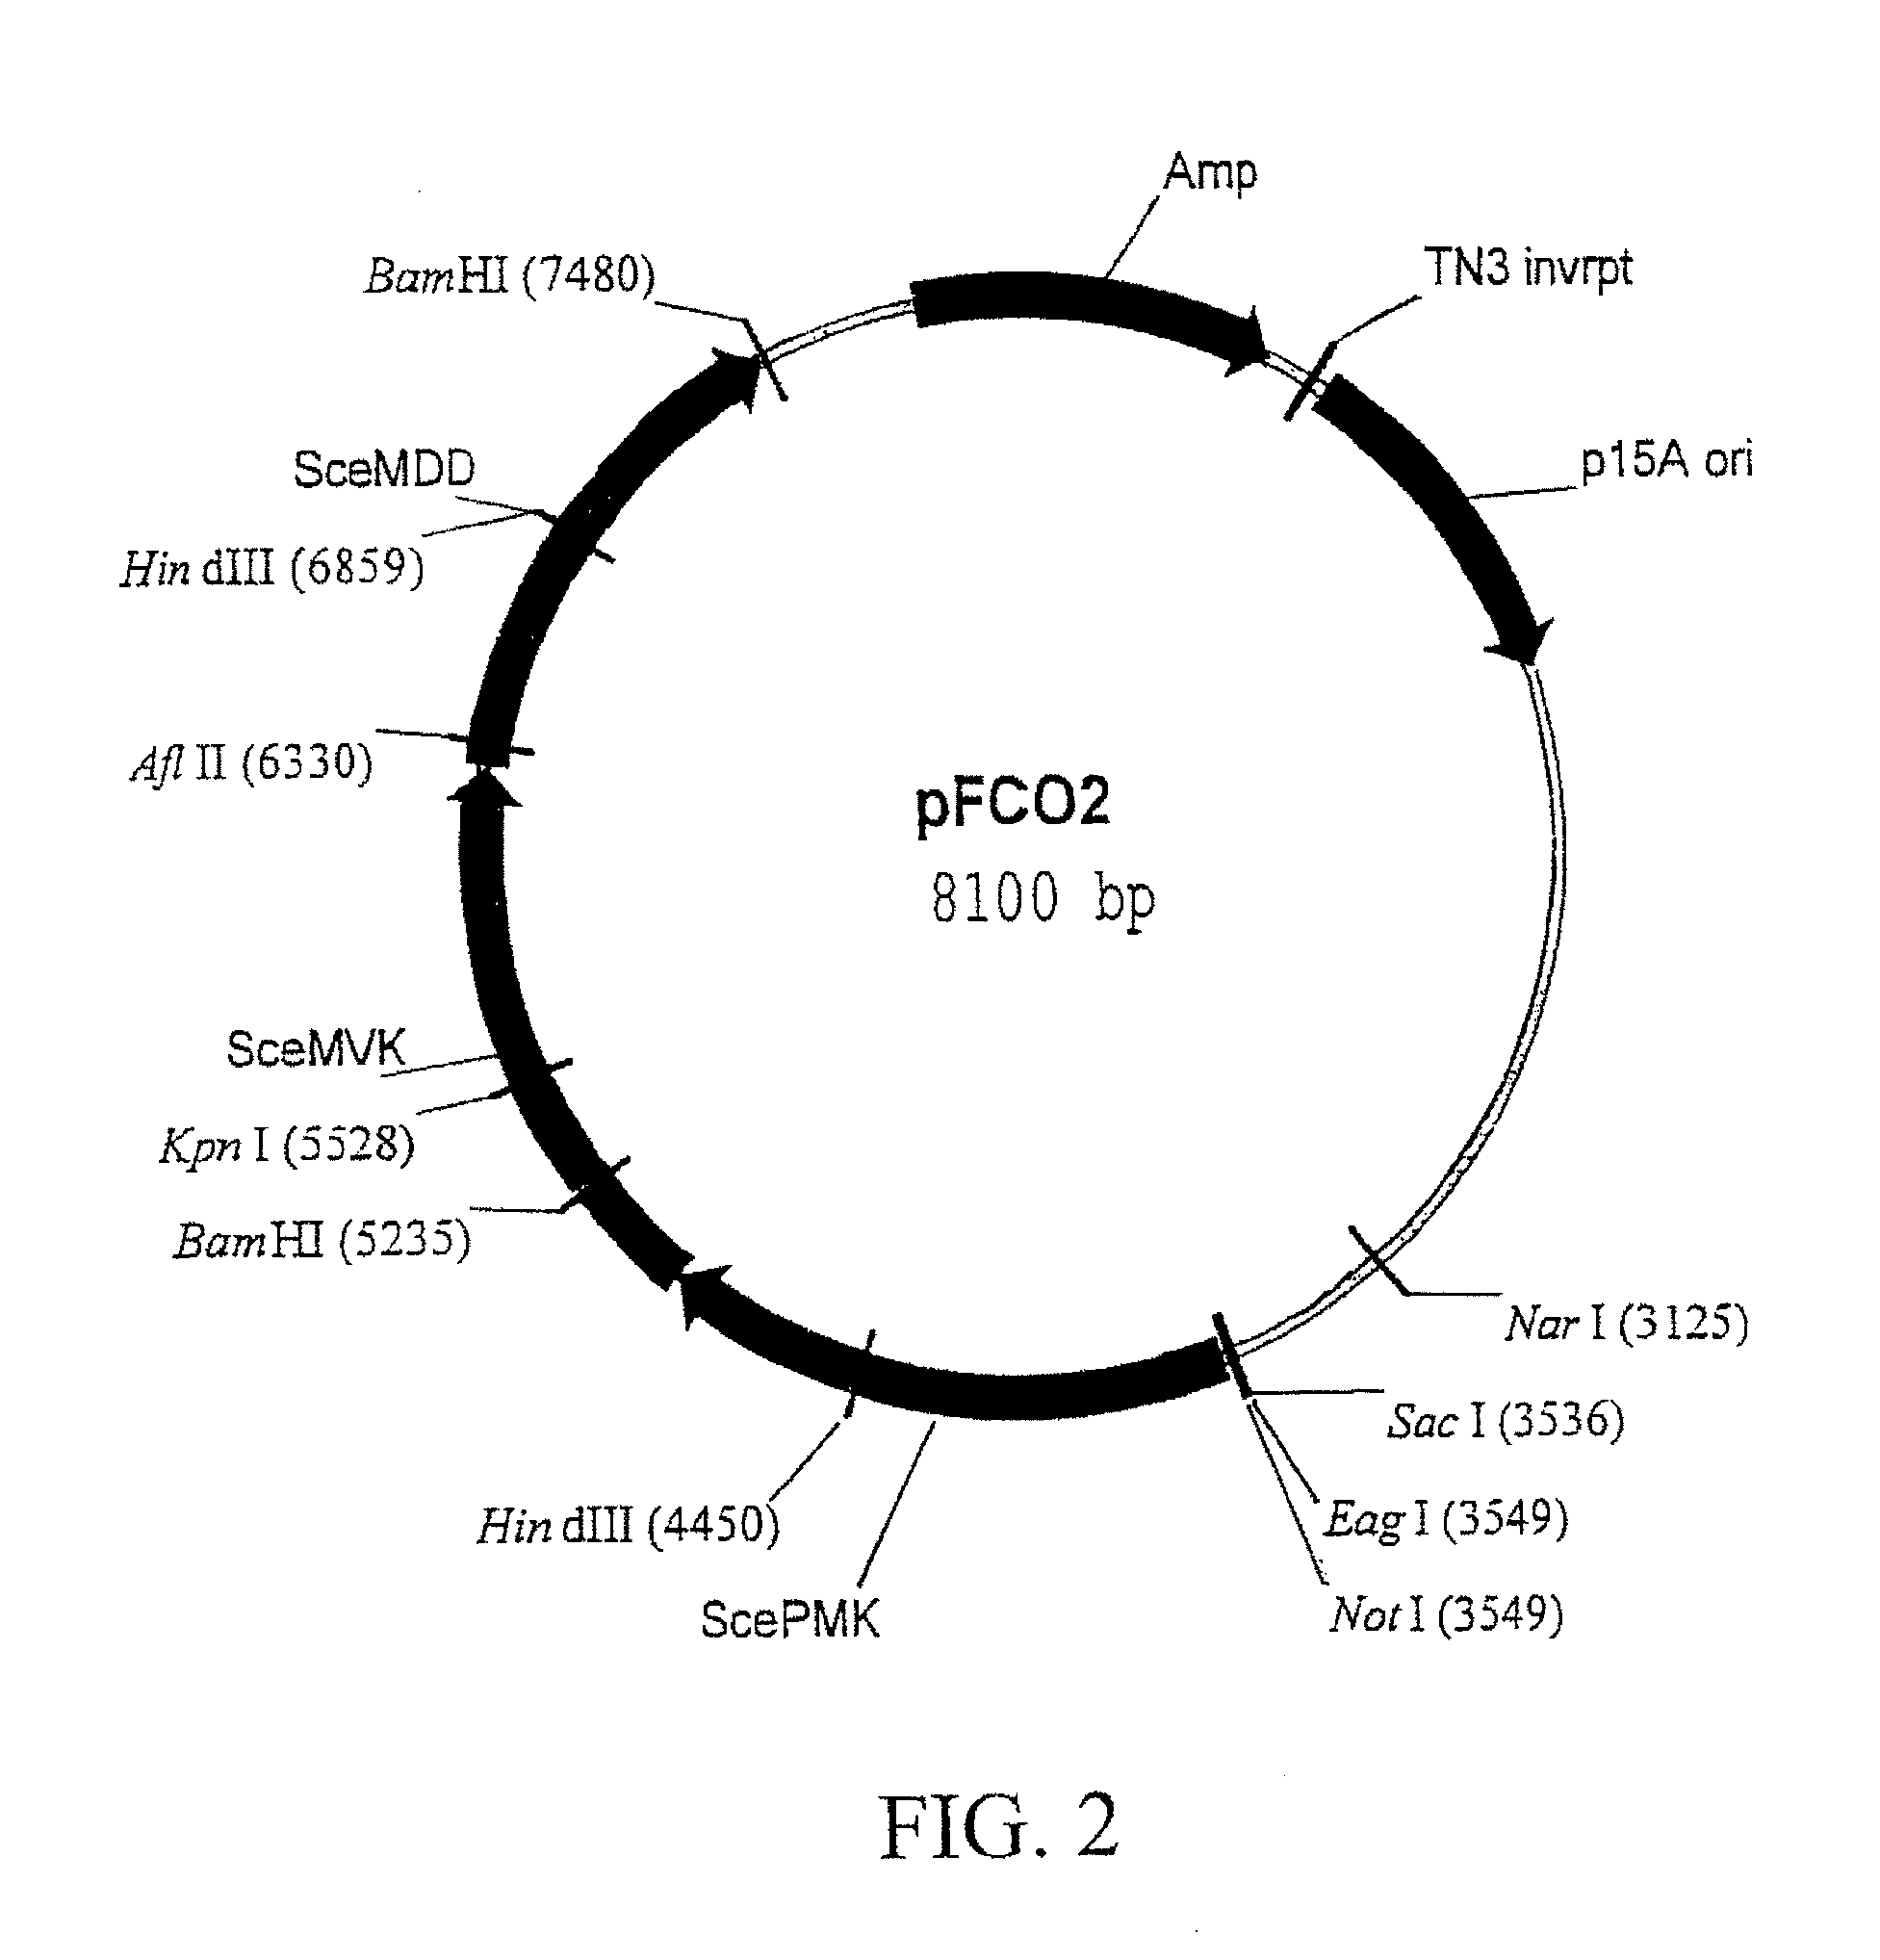 Gene positioning system for plastidic transformation and products thereof